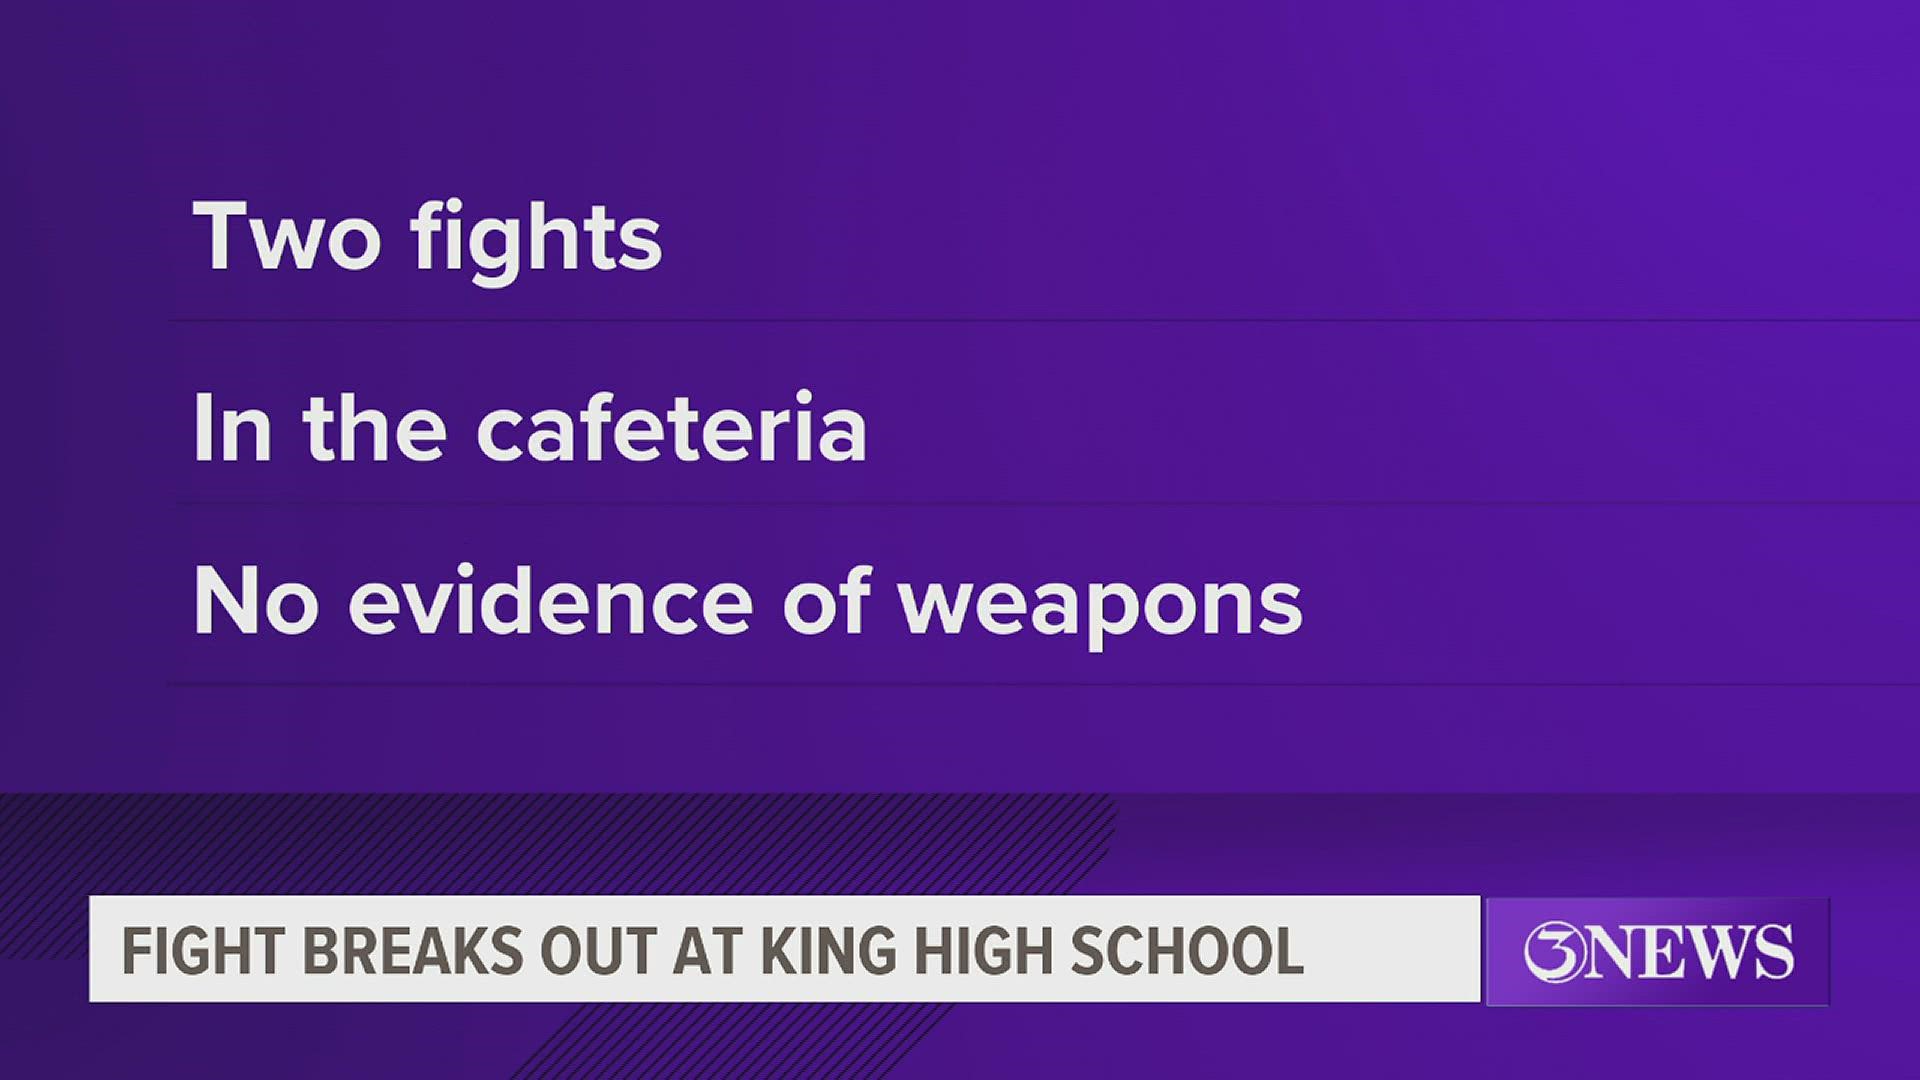 CCISD Police Chief Kirby Warnke said there is no evidence of any weapons being used during fight, despite rumors.